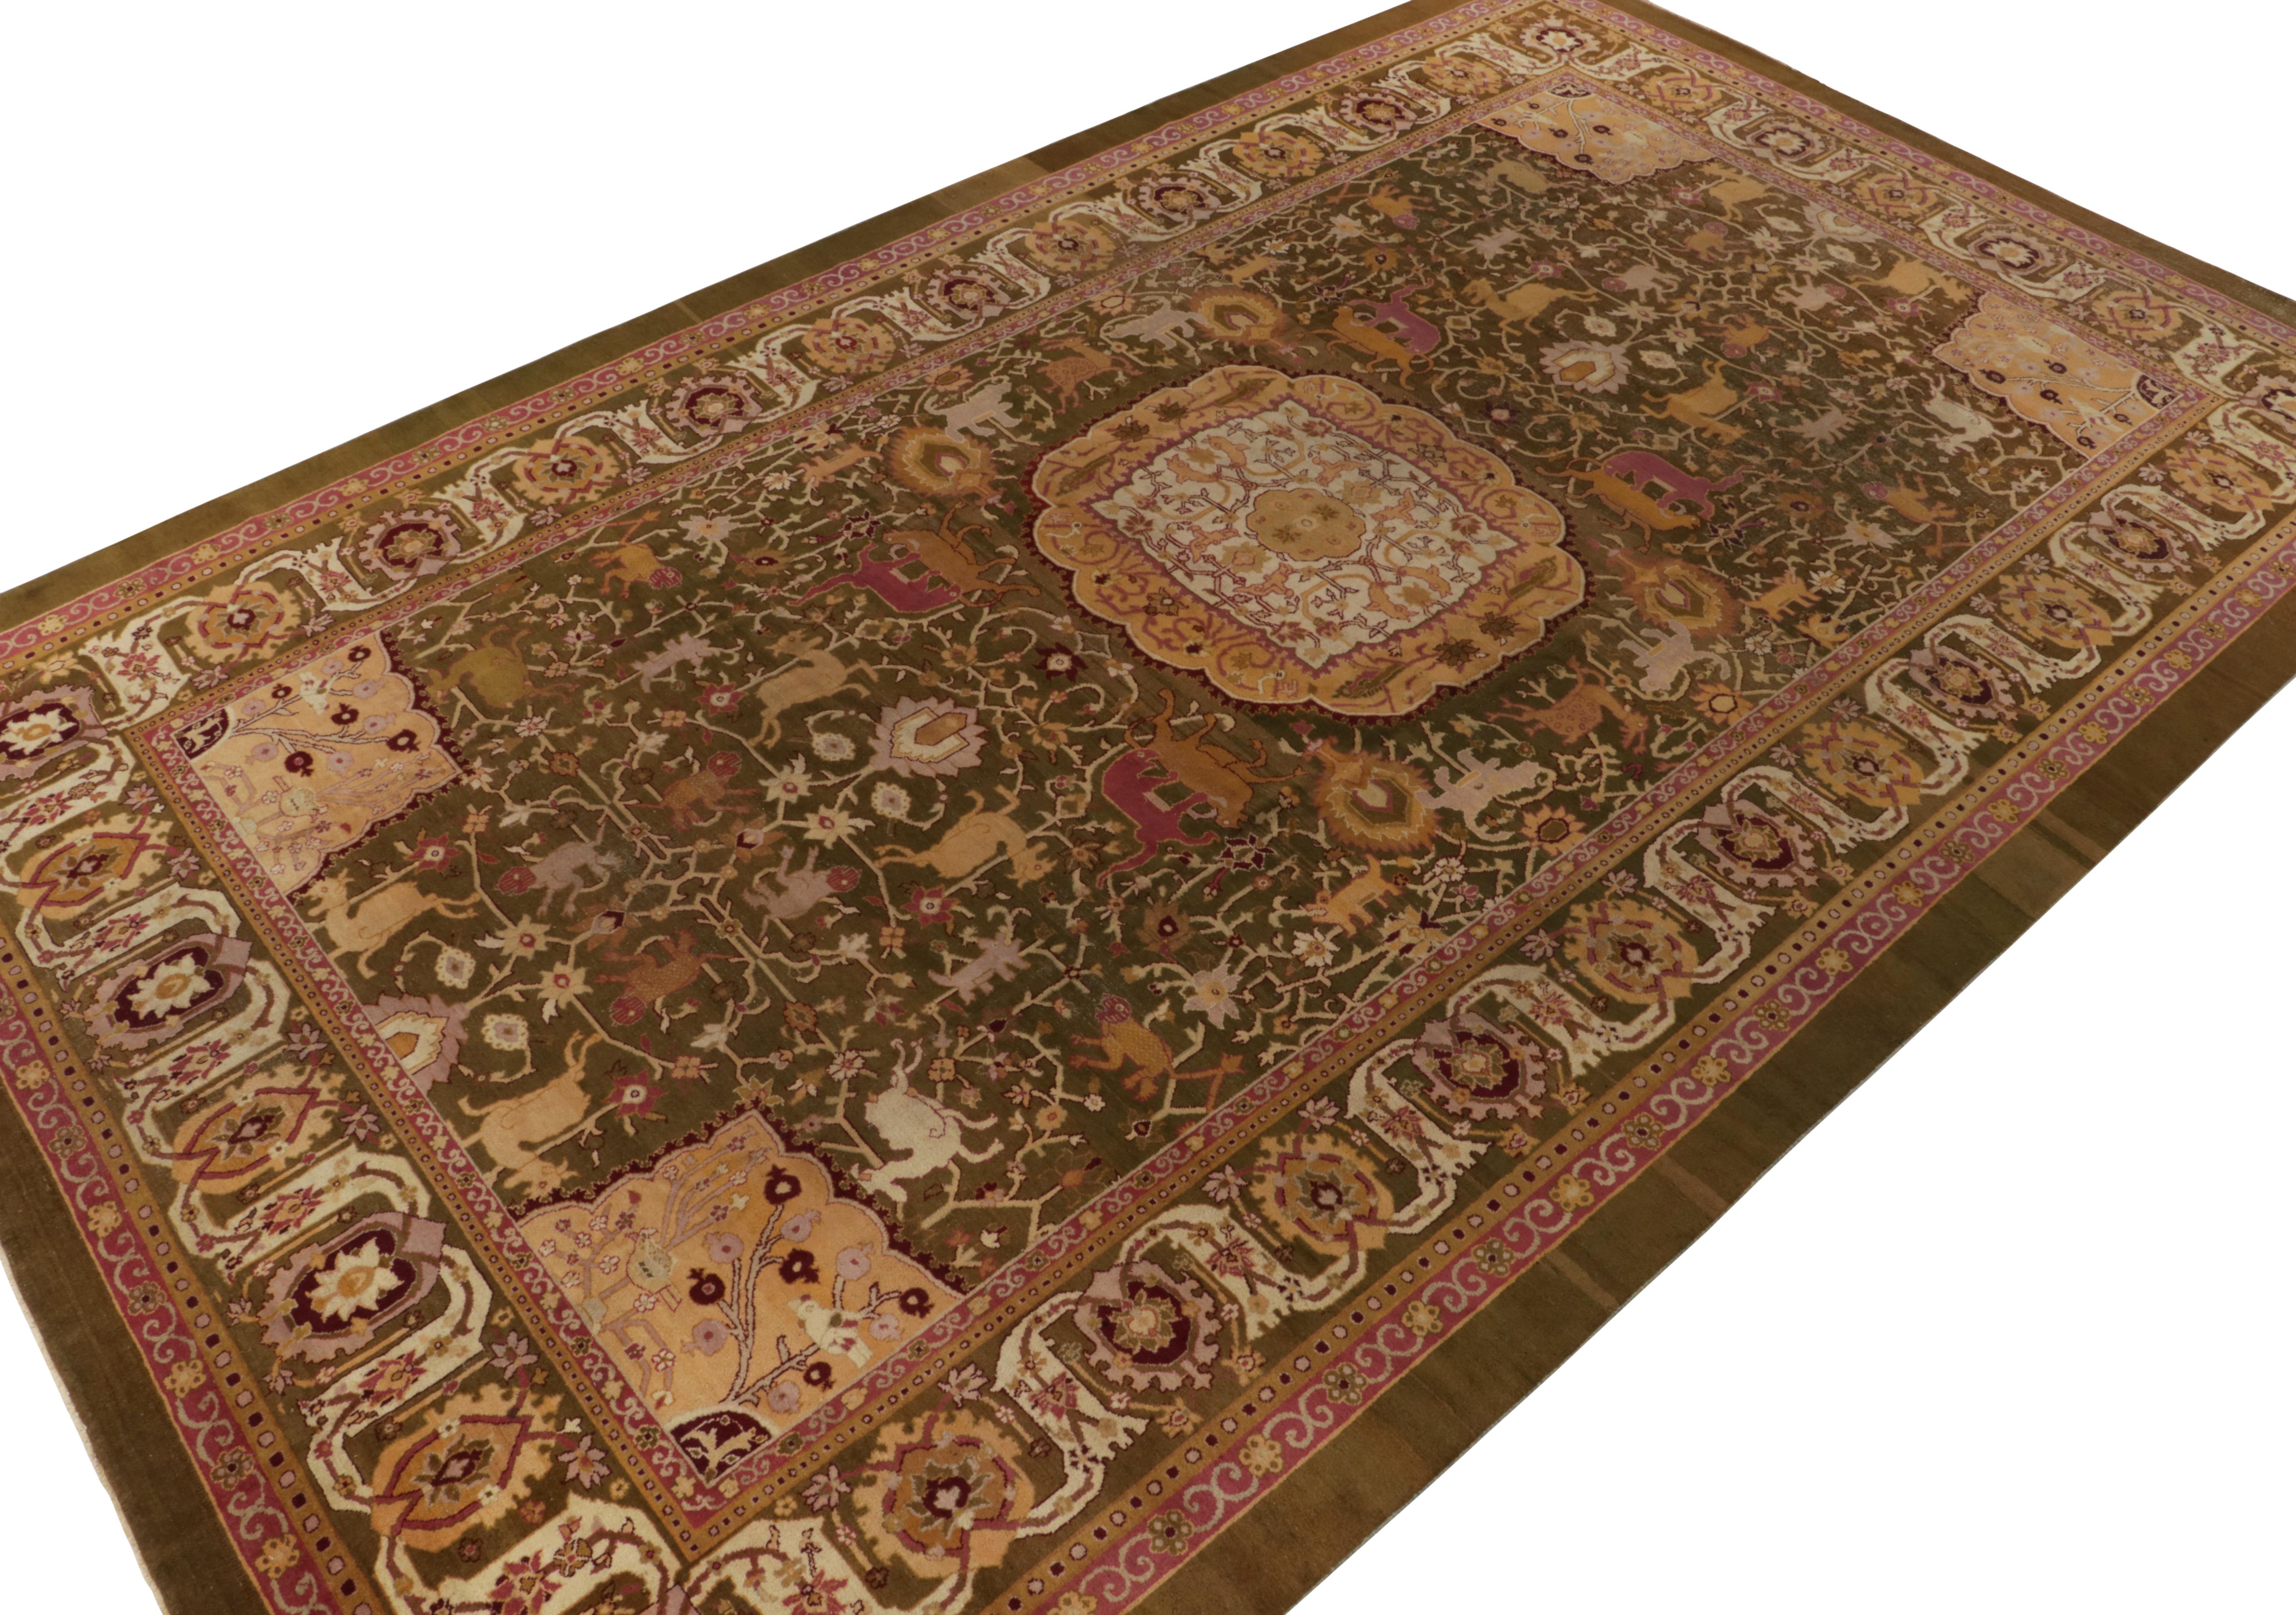 Originating from India circa 1880-1890, this 10x17 antique Amritsar rug is among the most rare additions to our collection. 

Inspired by early Persian design, this hand-knotted wool masterpiece depicts an elaborate mural of grand pictorials and